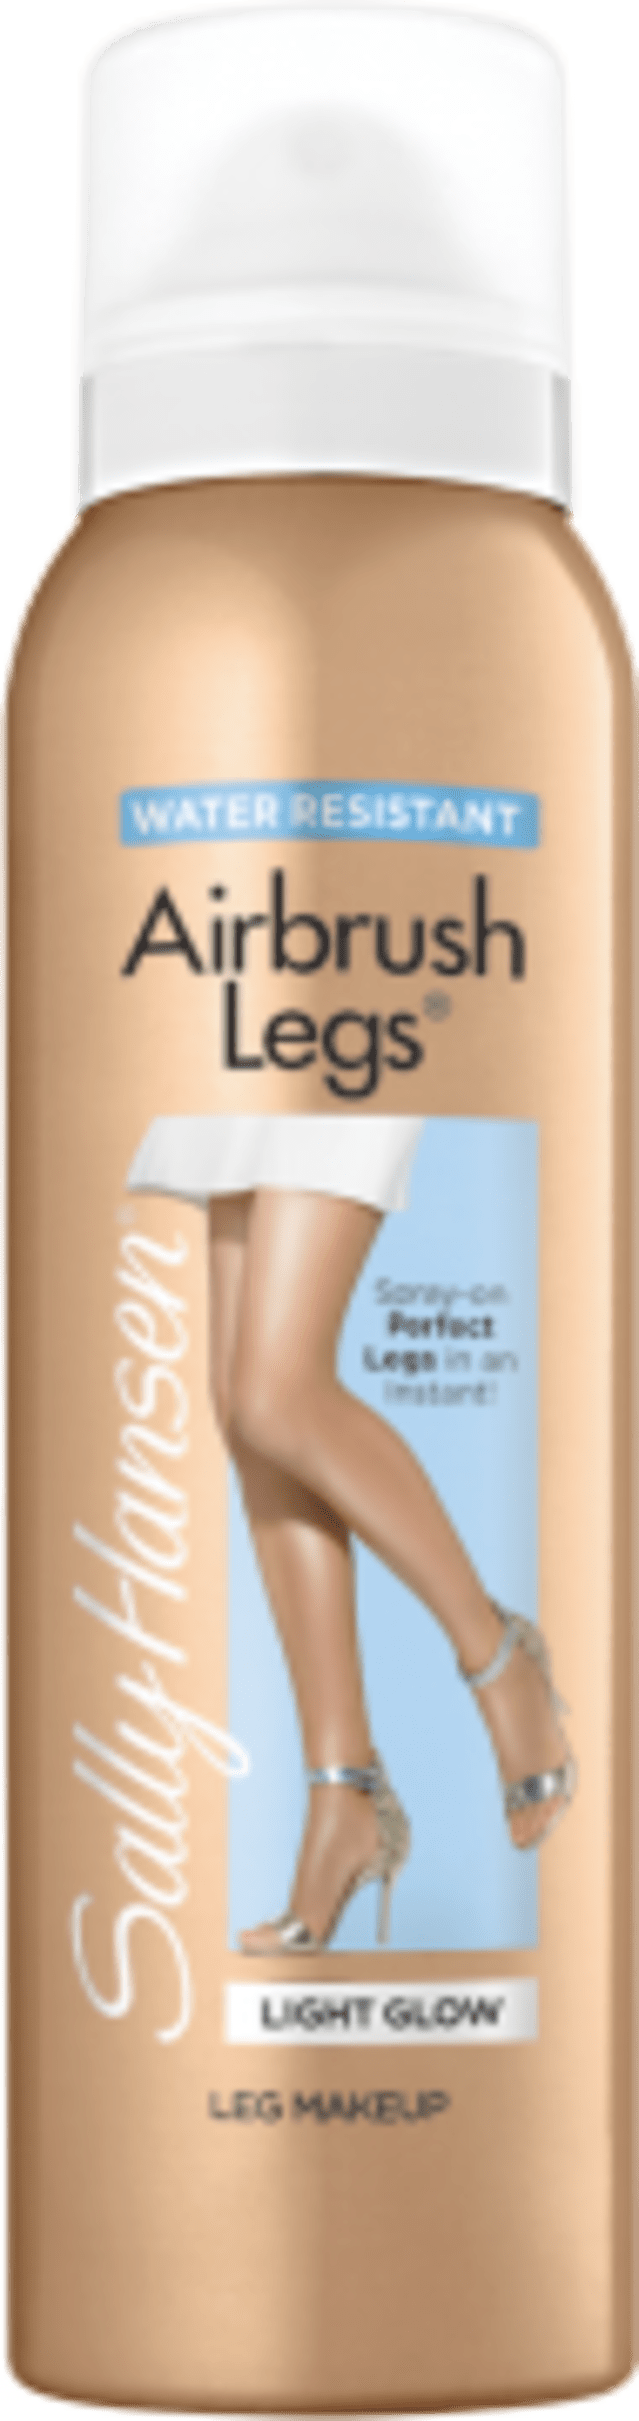 best of Pantyhose Brands of airbrush